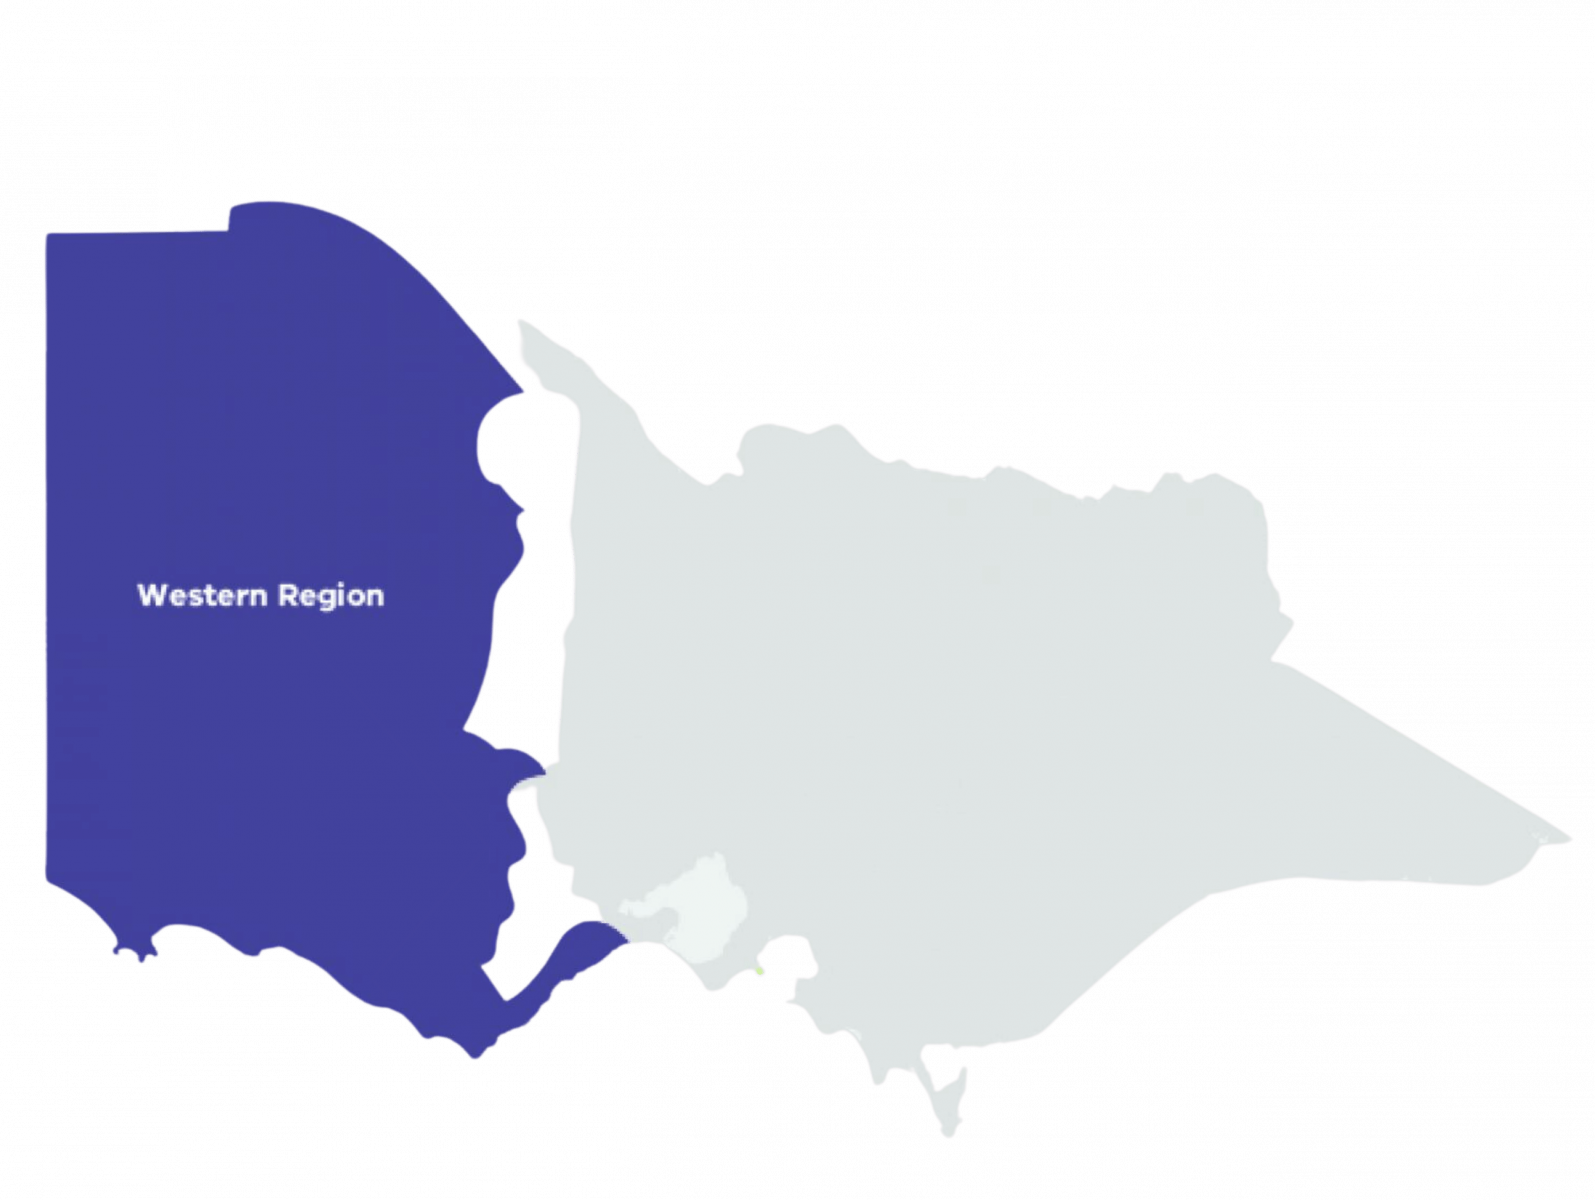 Image of state of Victoria with the western region highlighted.